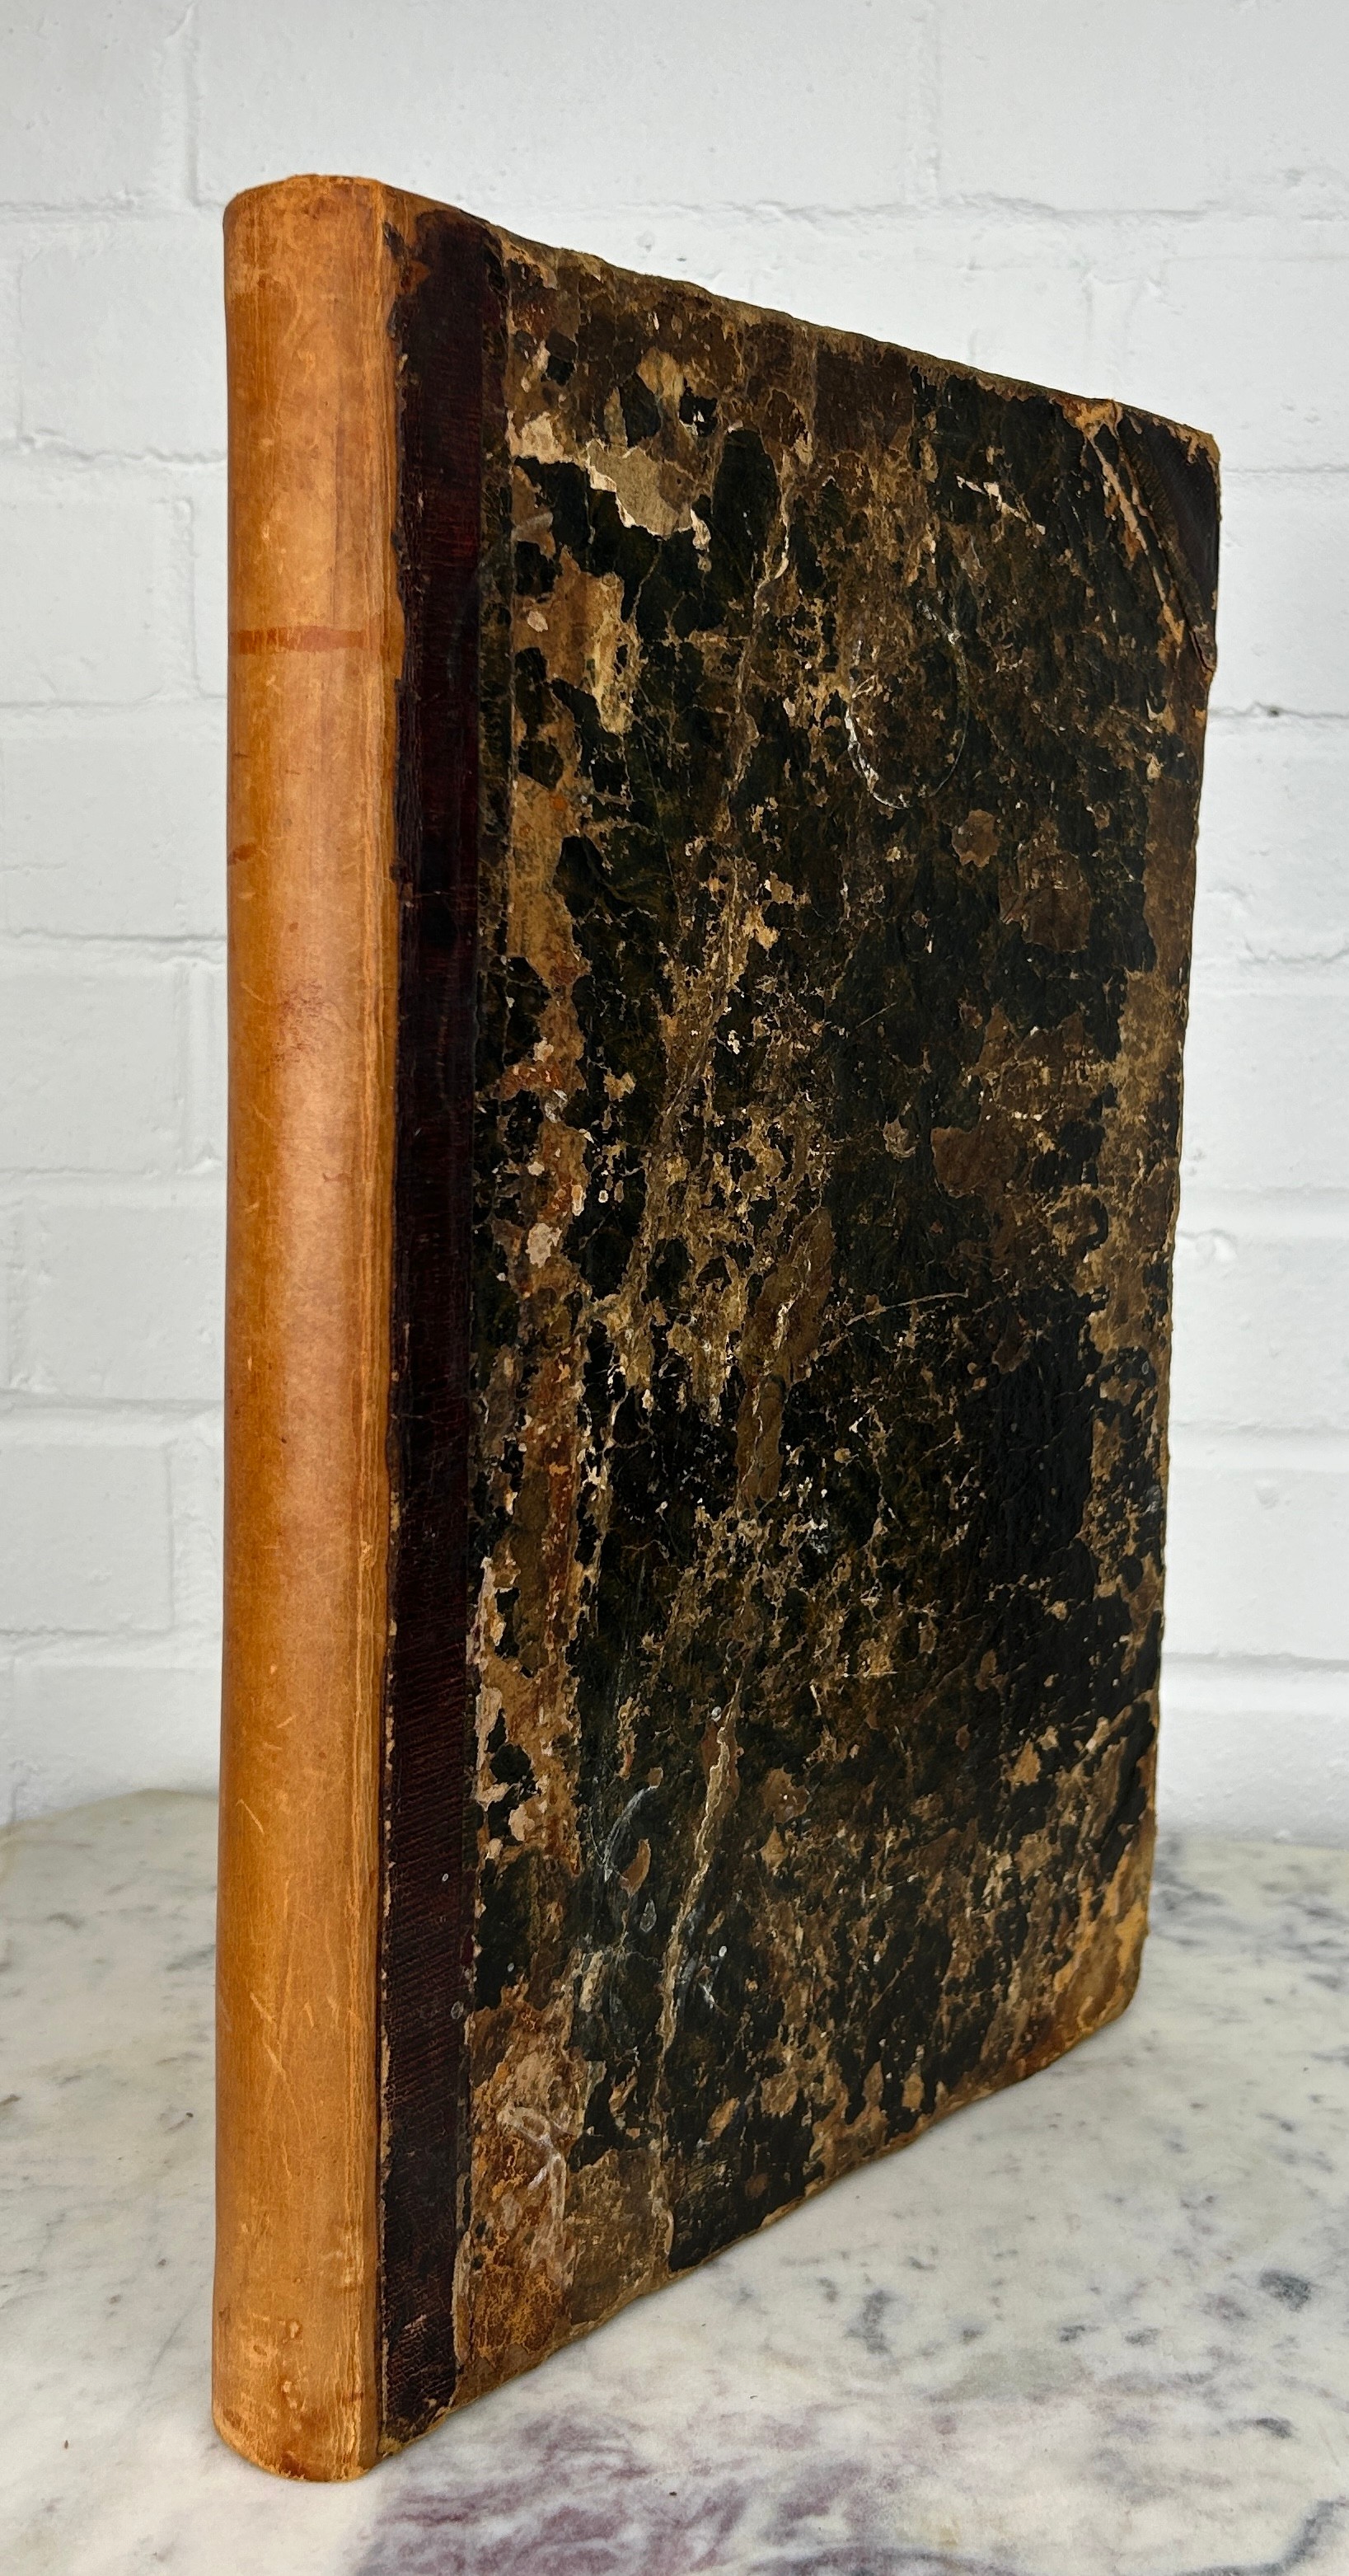 PIERCE EGAN: LIFE IN LONDON AND SPORTING GUIDE, 1826 EDITION, With various handwritten ink notes (